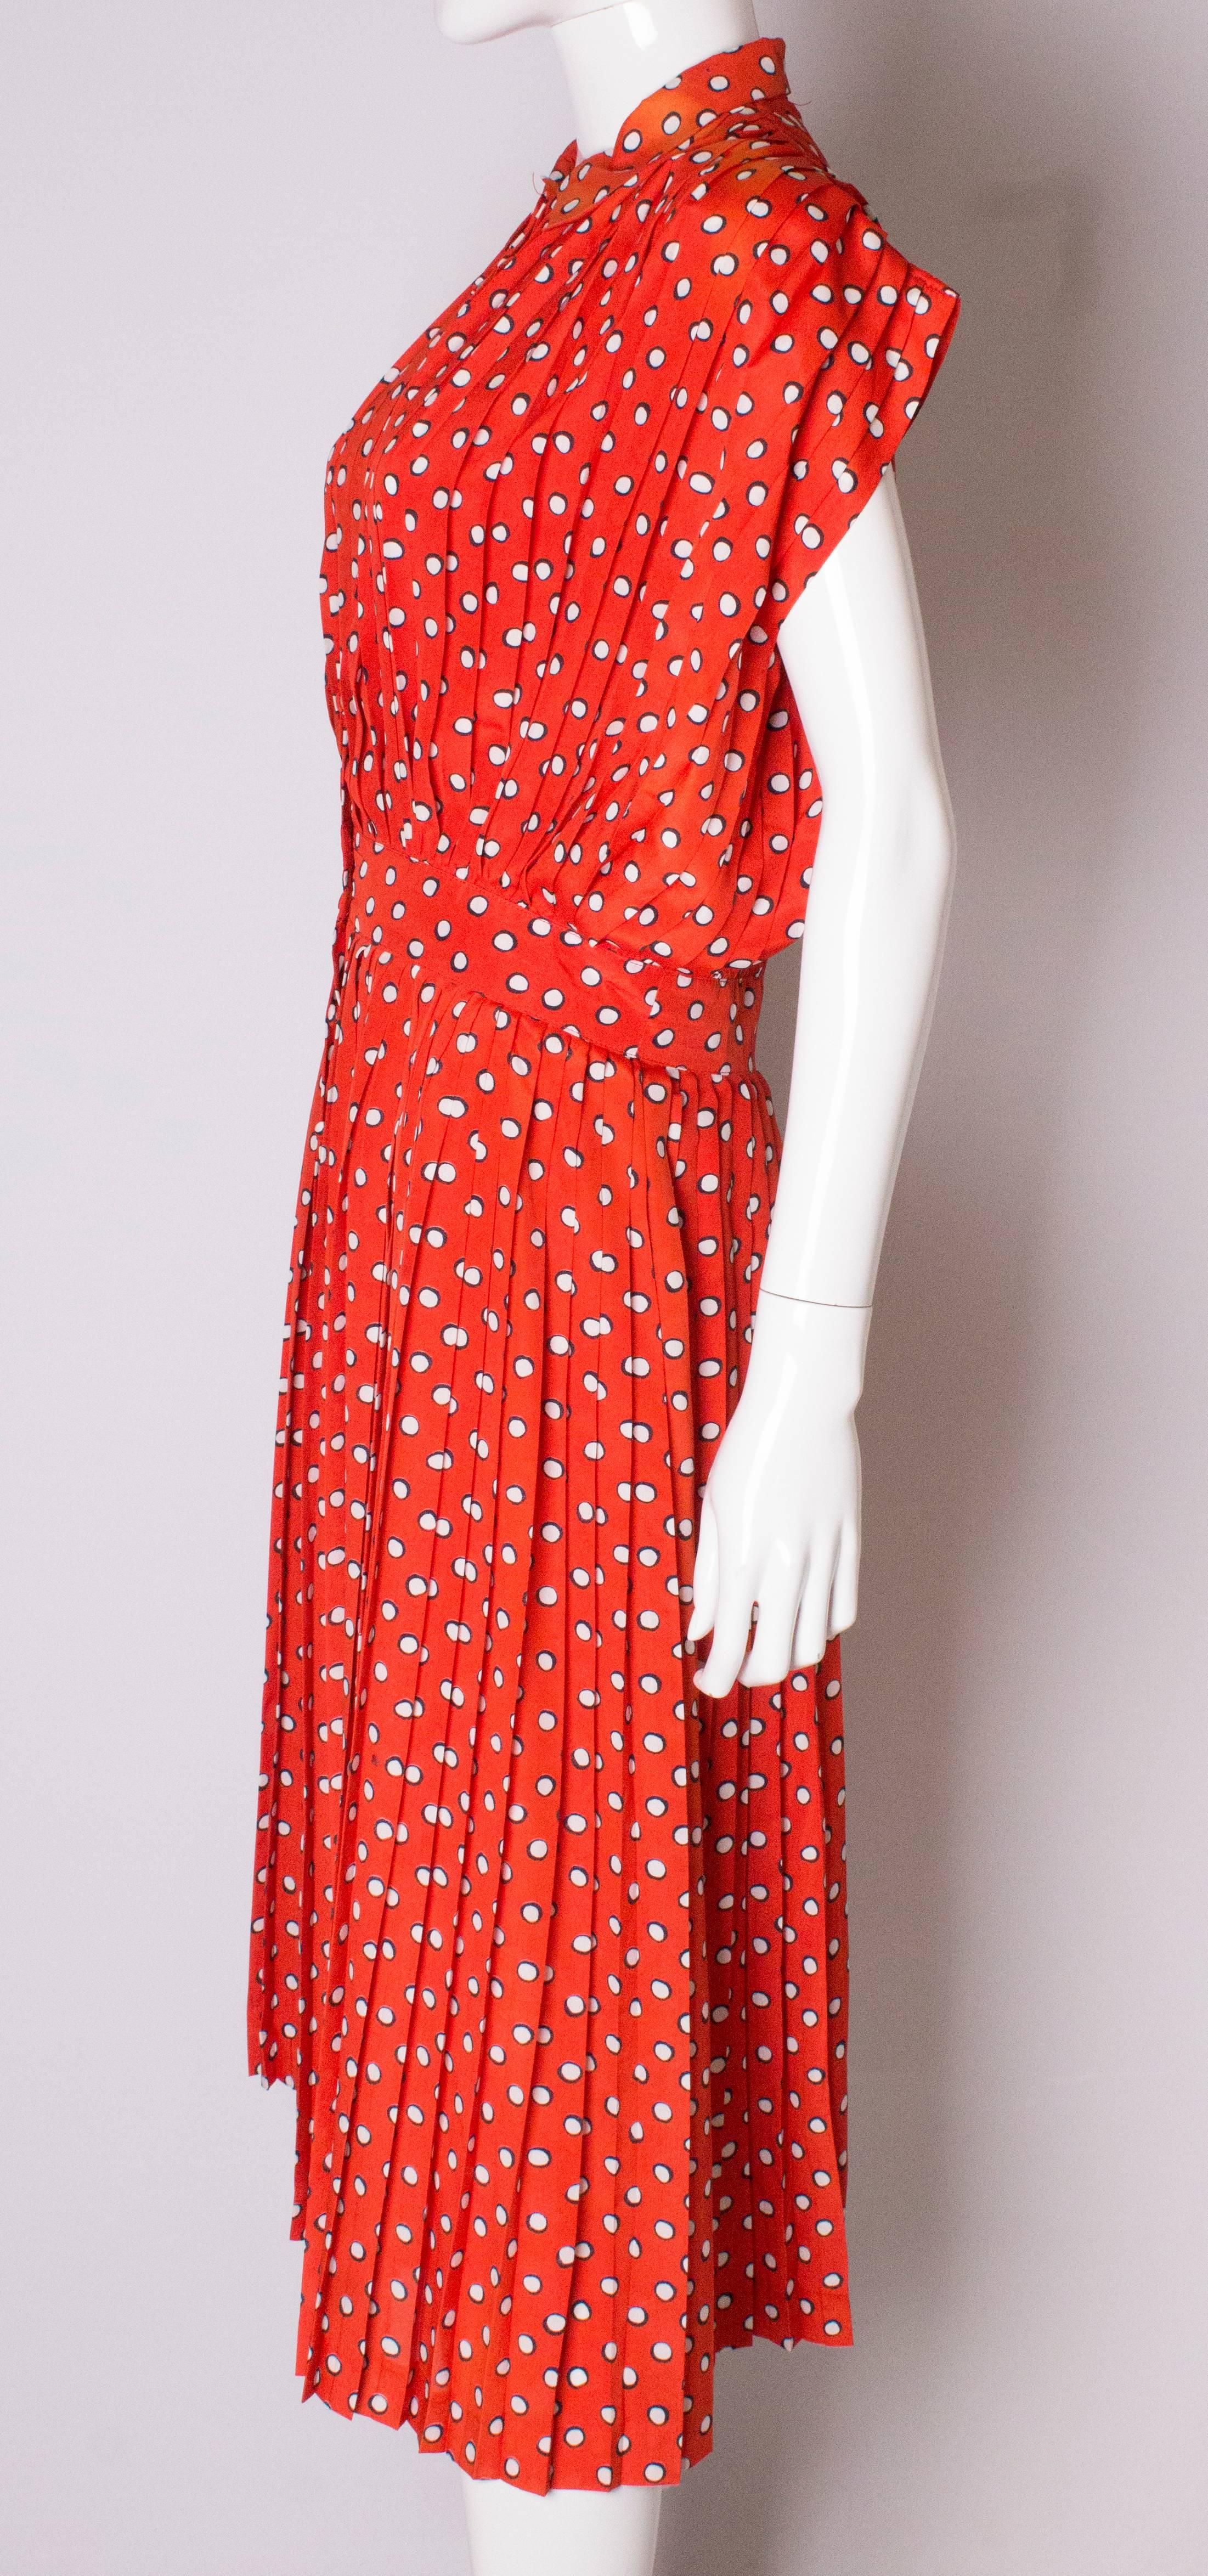 Georges Rechs Spotty Pleated Dress 1970s 1